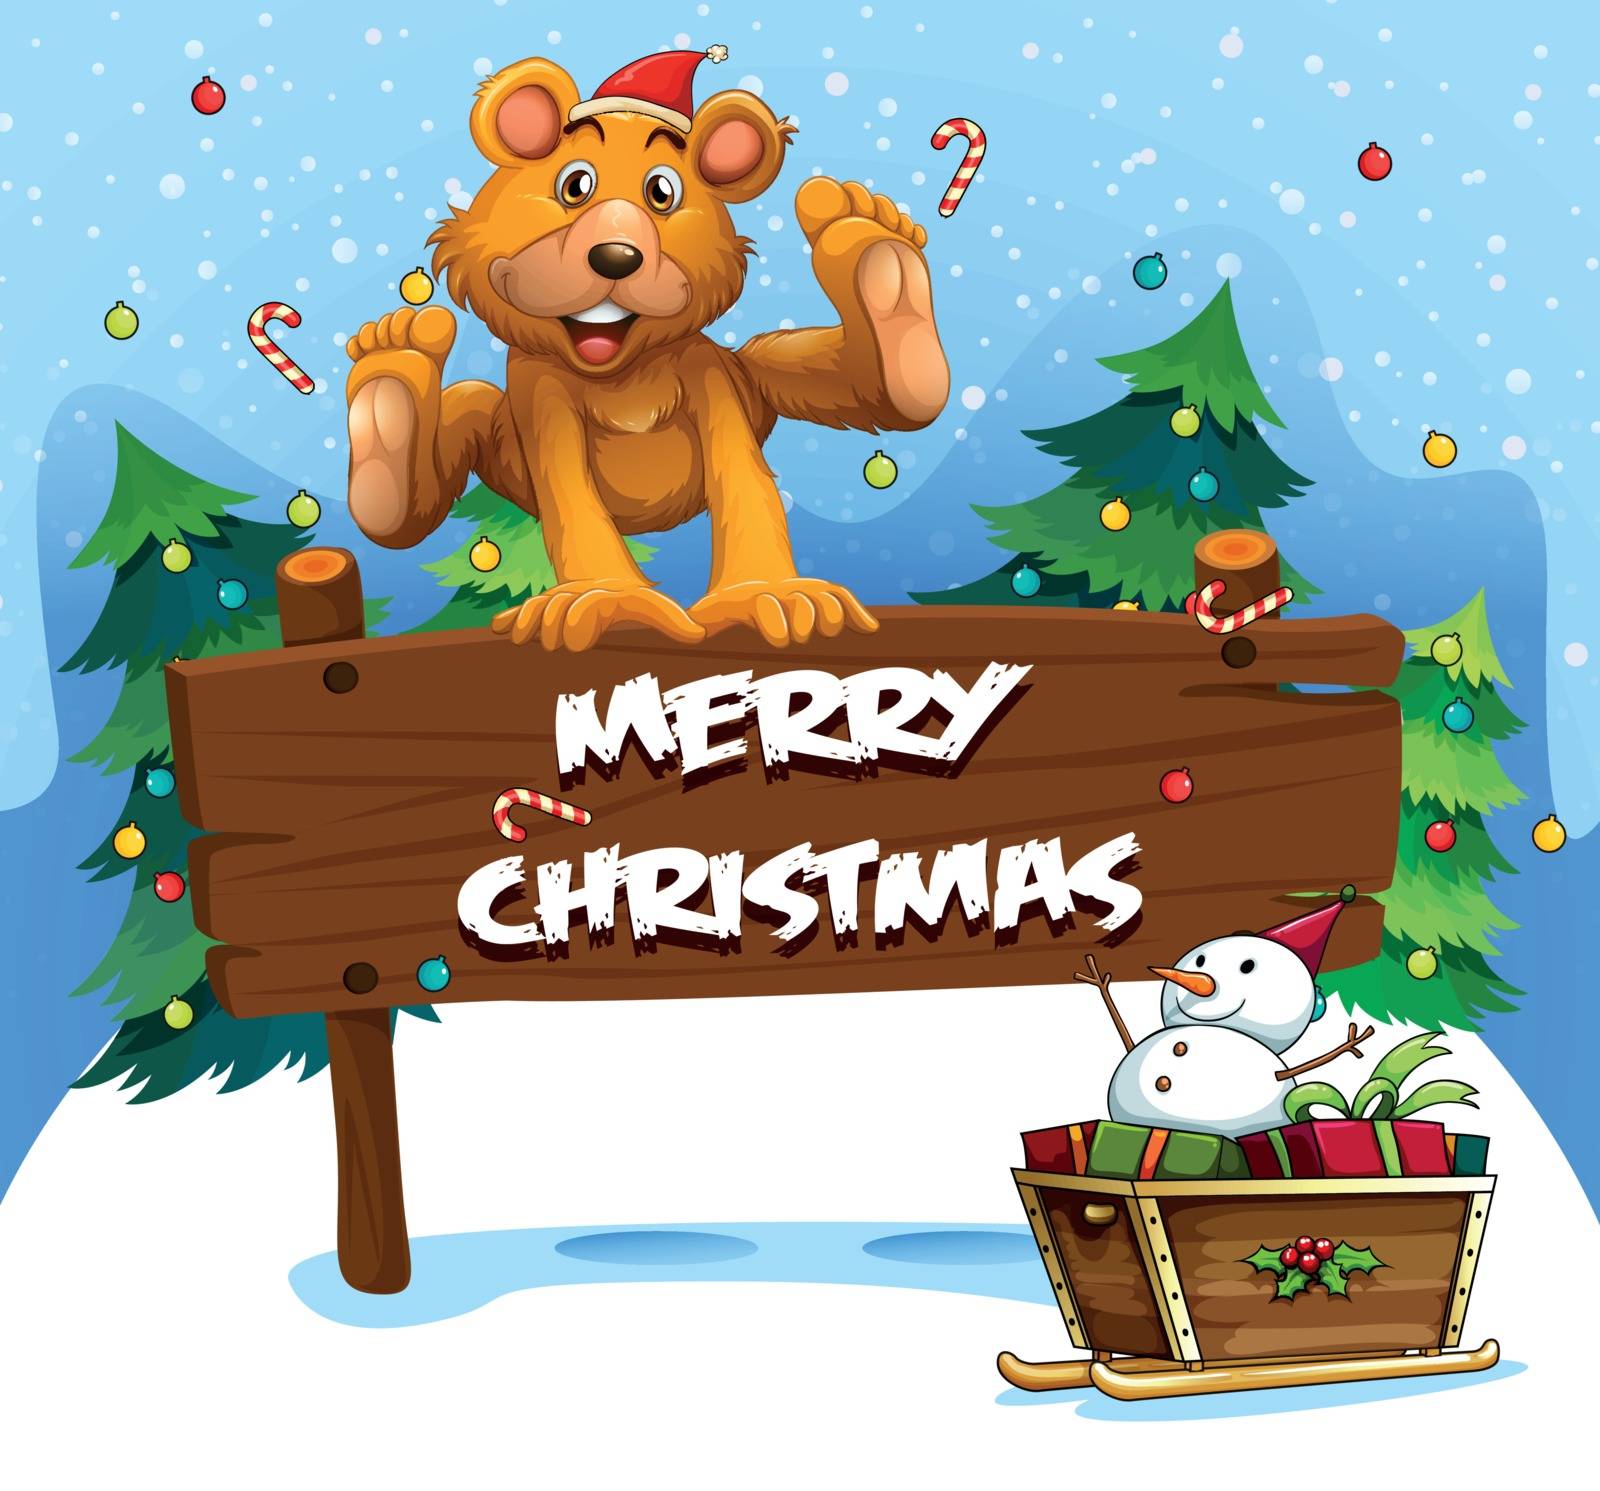 Illustration of a playful bear playing near the christmas signboard